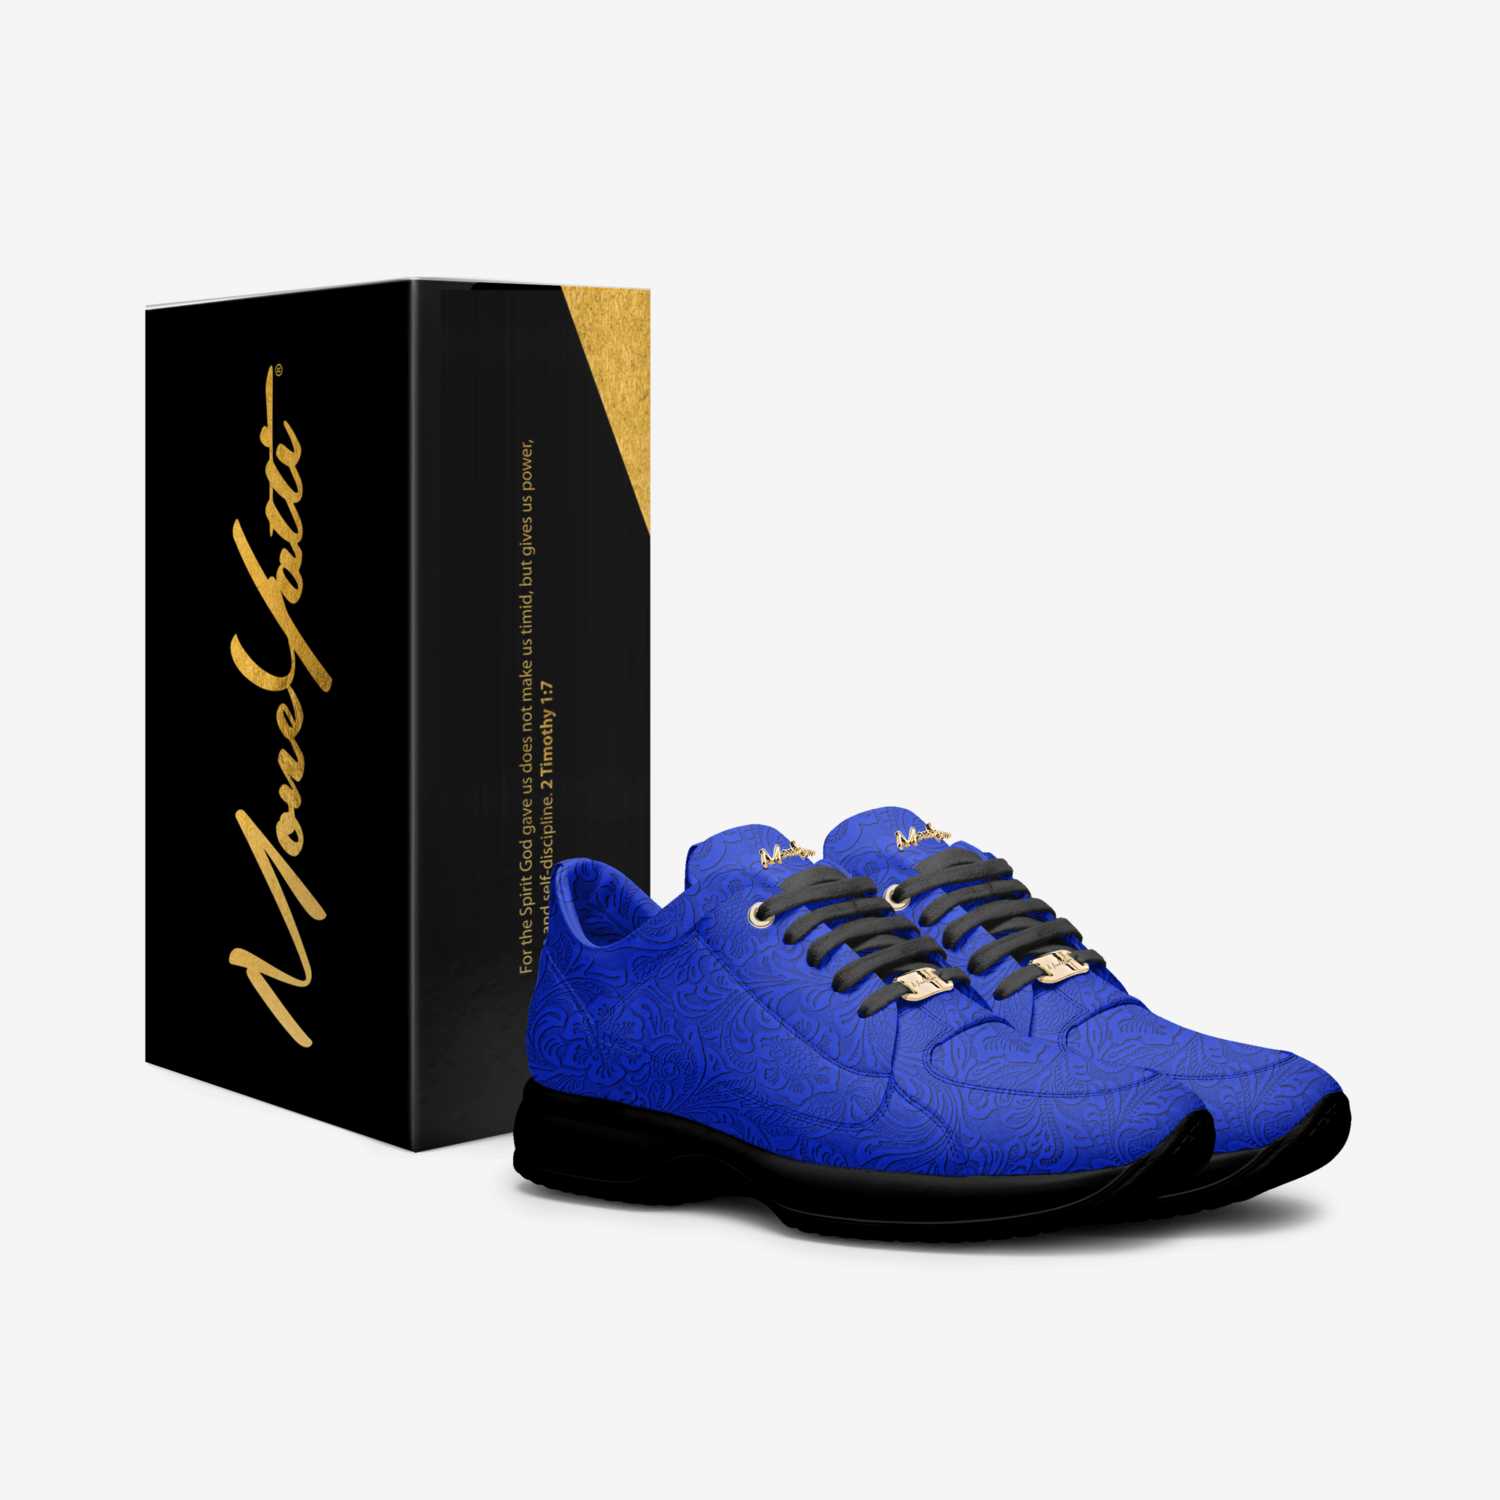 Masterpiece 062 custom made in Italy shoes by Moneyatti Brand | Box view